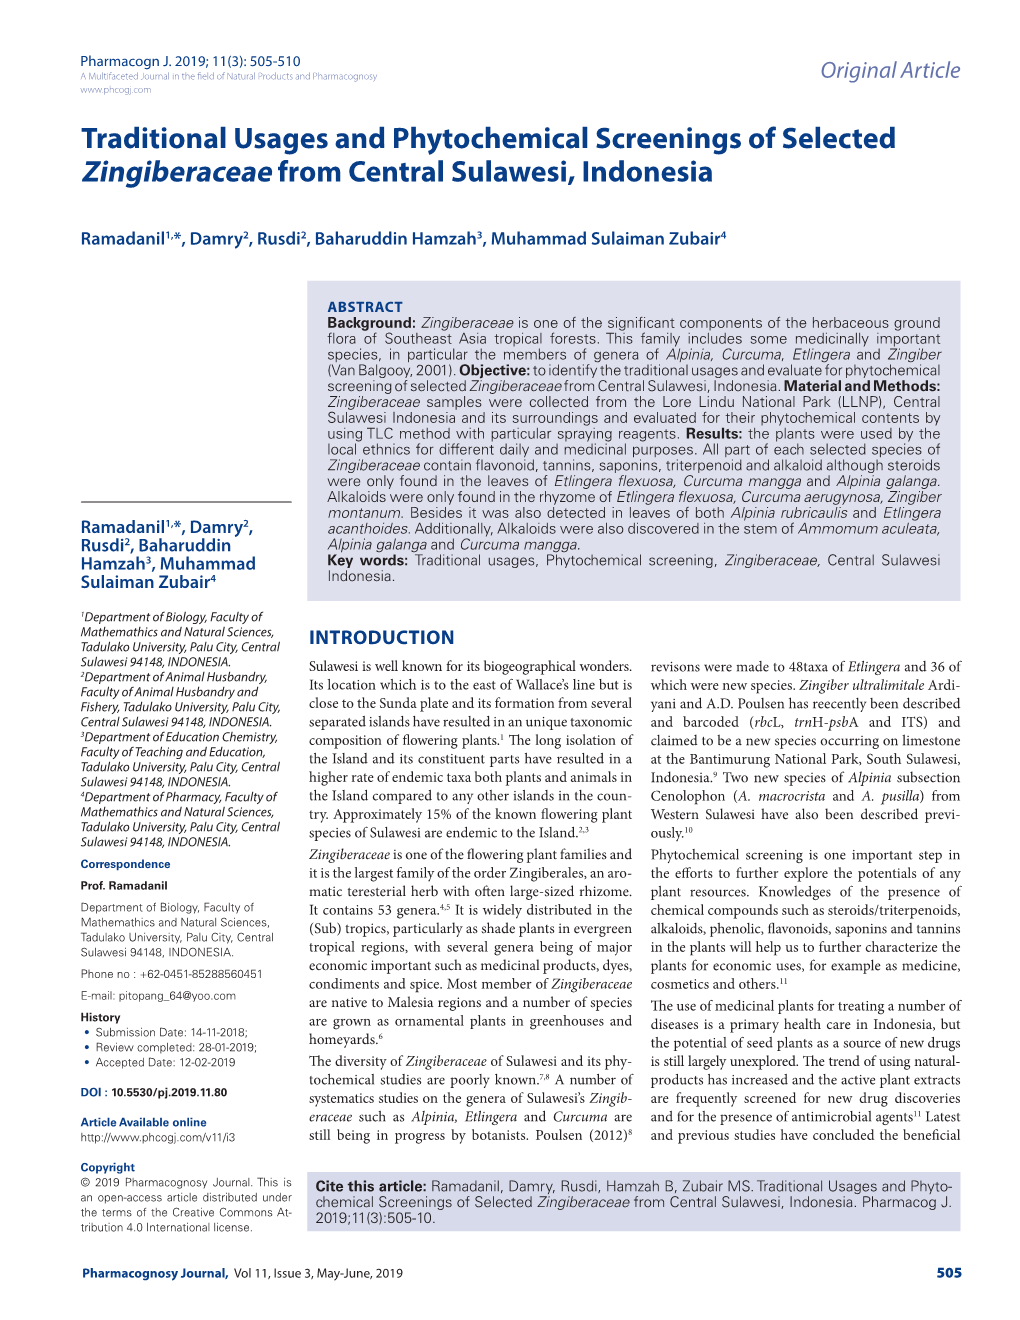 Traditional Usages and Phytochemical Screenings of Selected Zingiberaceae from Central Sulawesi, Indonesia